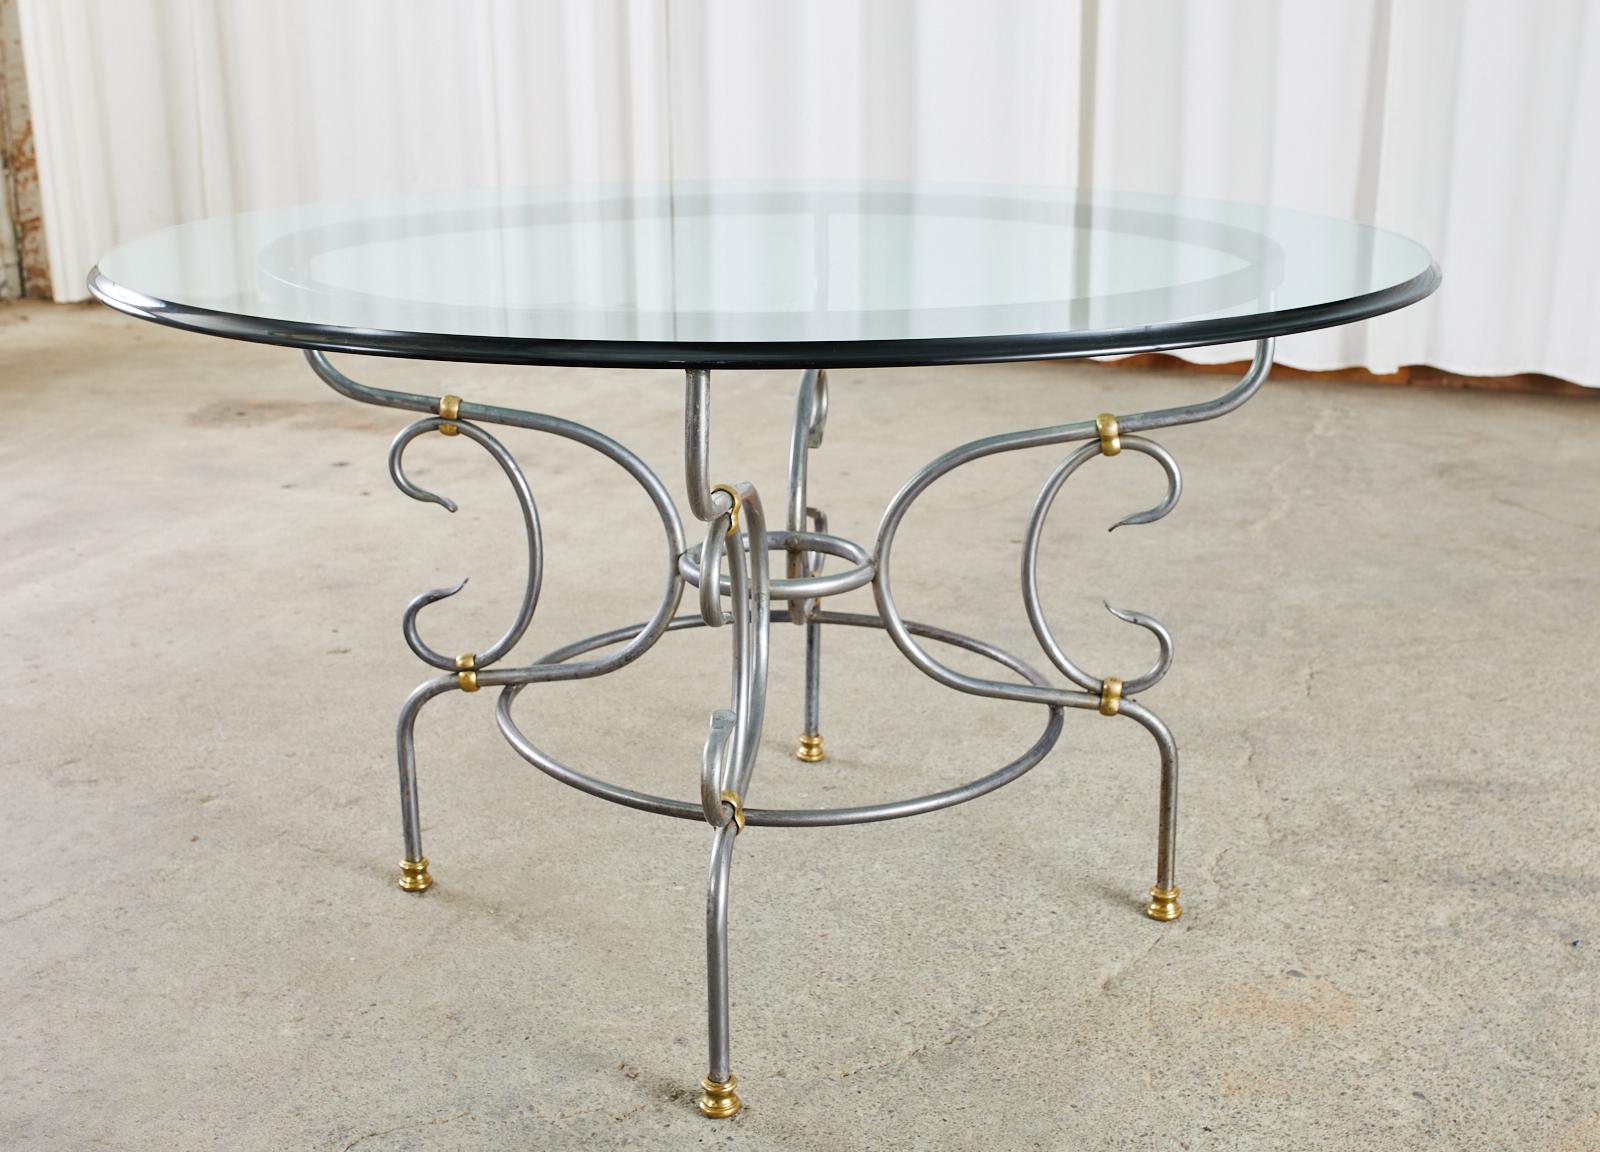 20th Century French Art Nouveau Style Steel Bronze Garden Dining Table